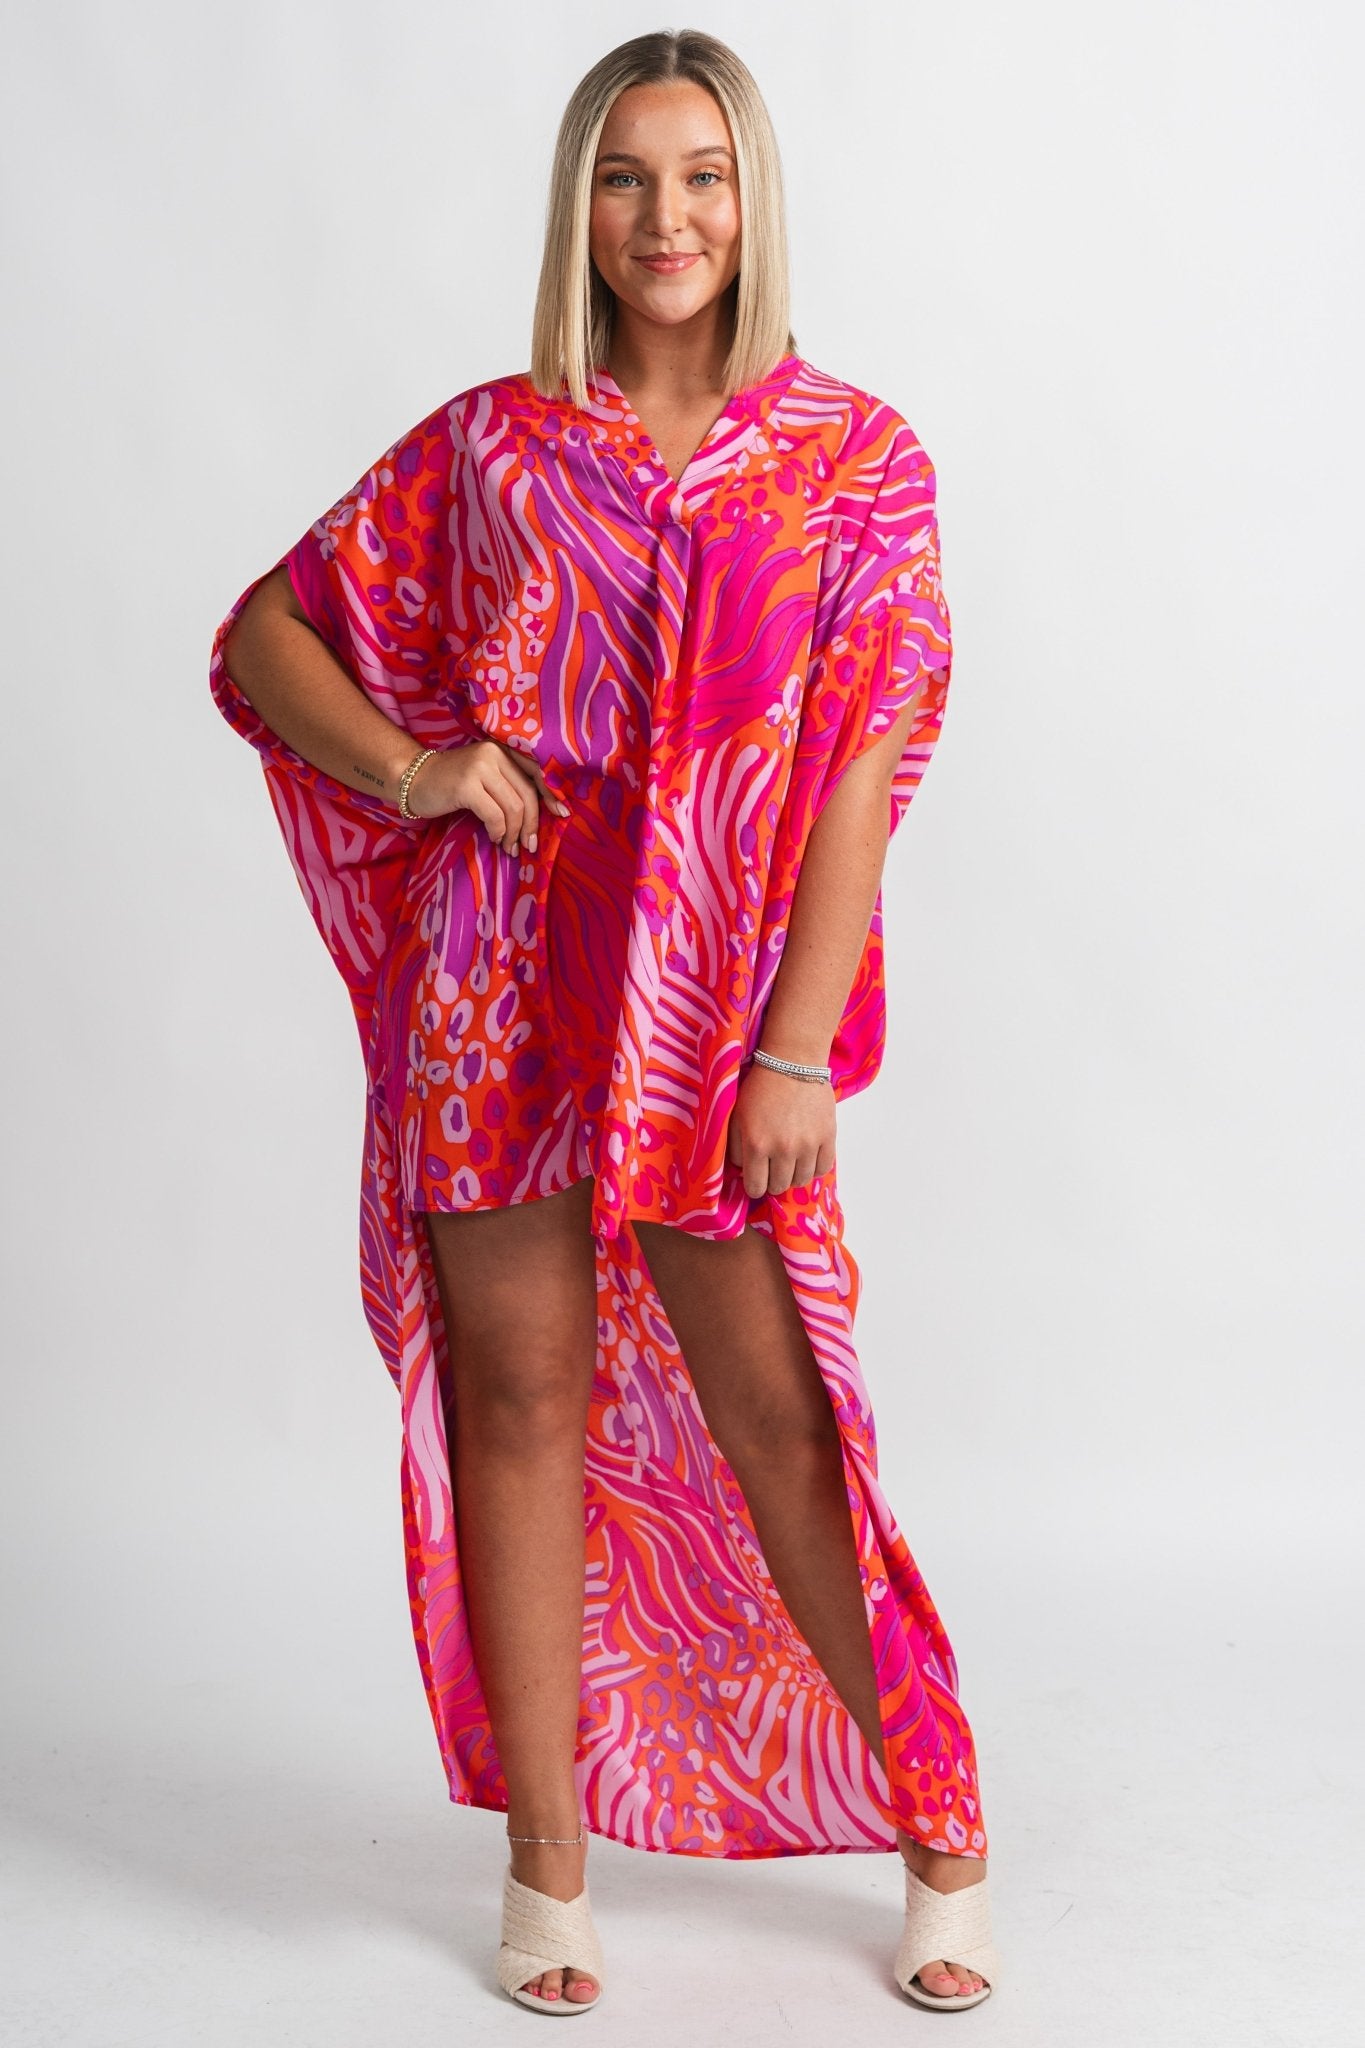 Printed high-low dress purple/orange - Stylish dress - Trendy Staycation Outfits at Lush Fashion Lounge Boutique in Oklahoma City